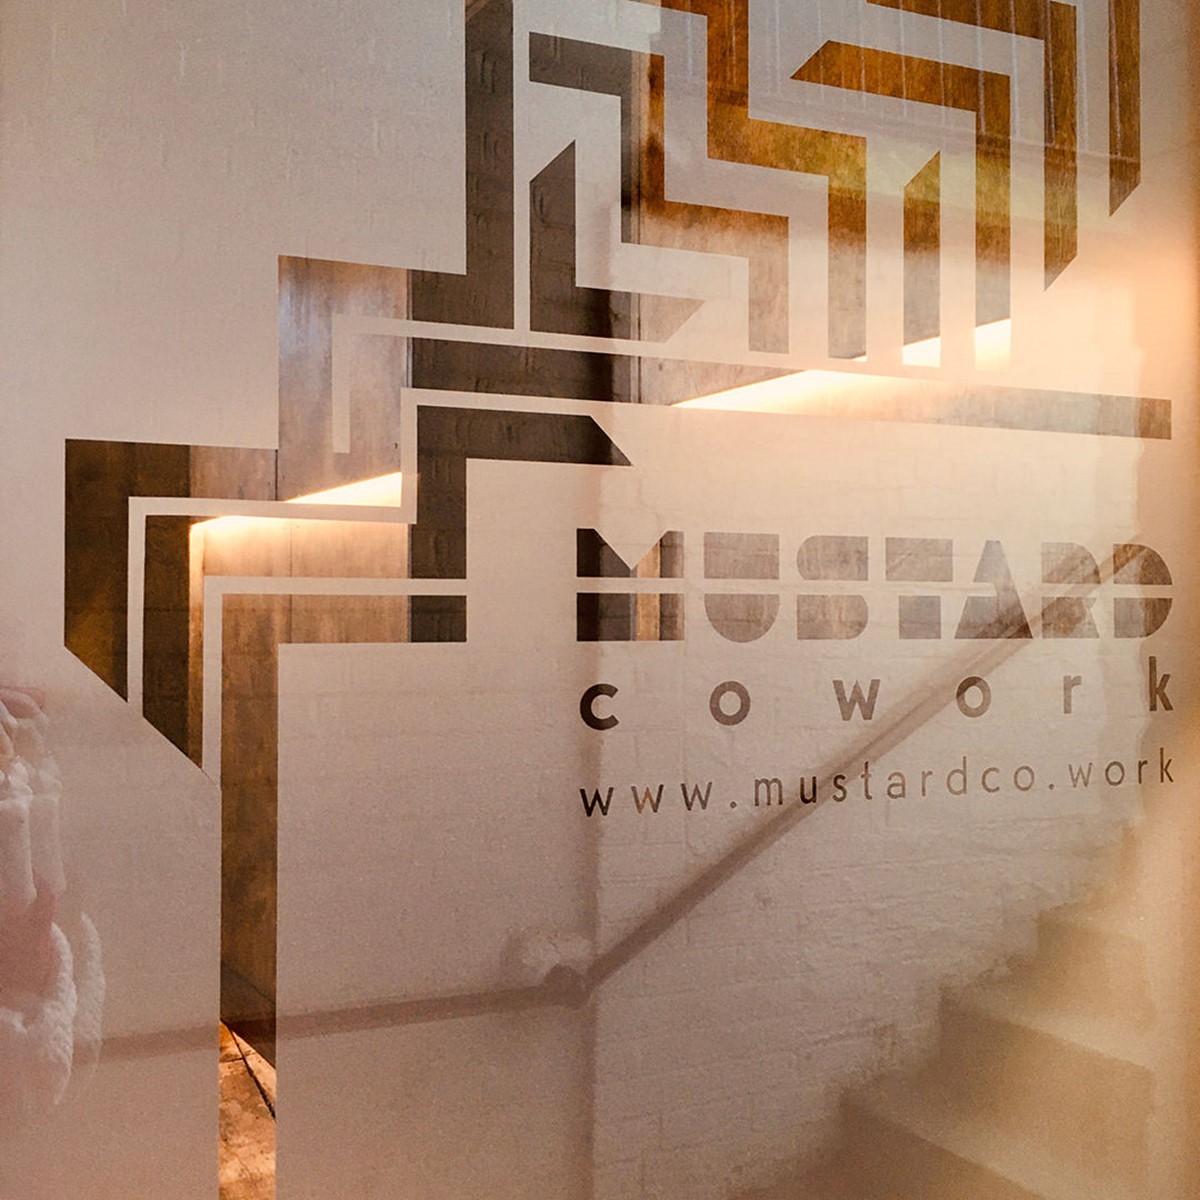 Mustard Coworking. Brand identity door vinyls close-up. By design agency Superfried. Manchester.